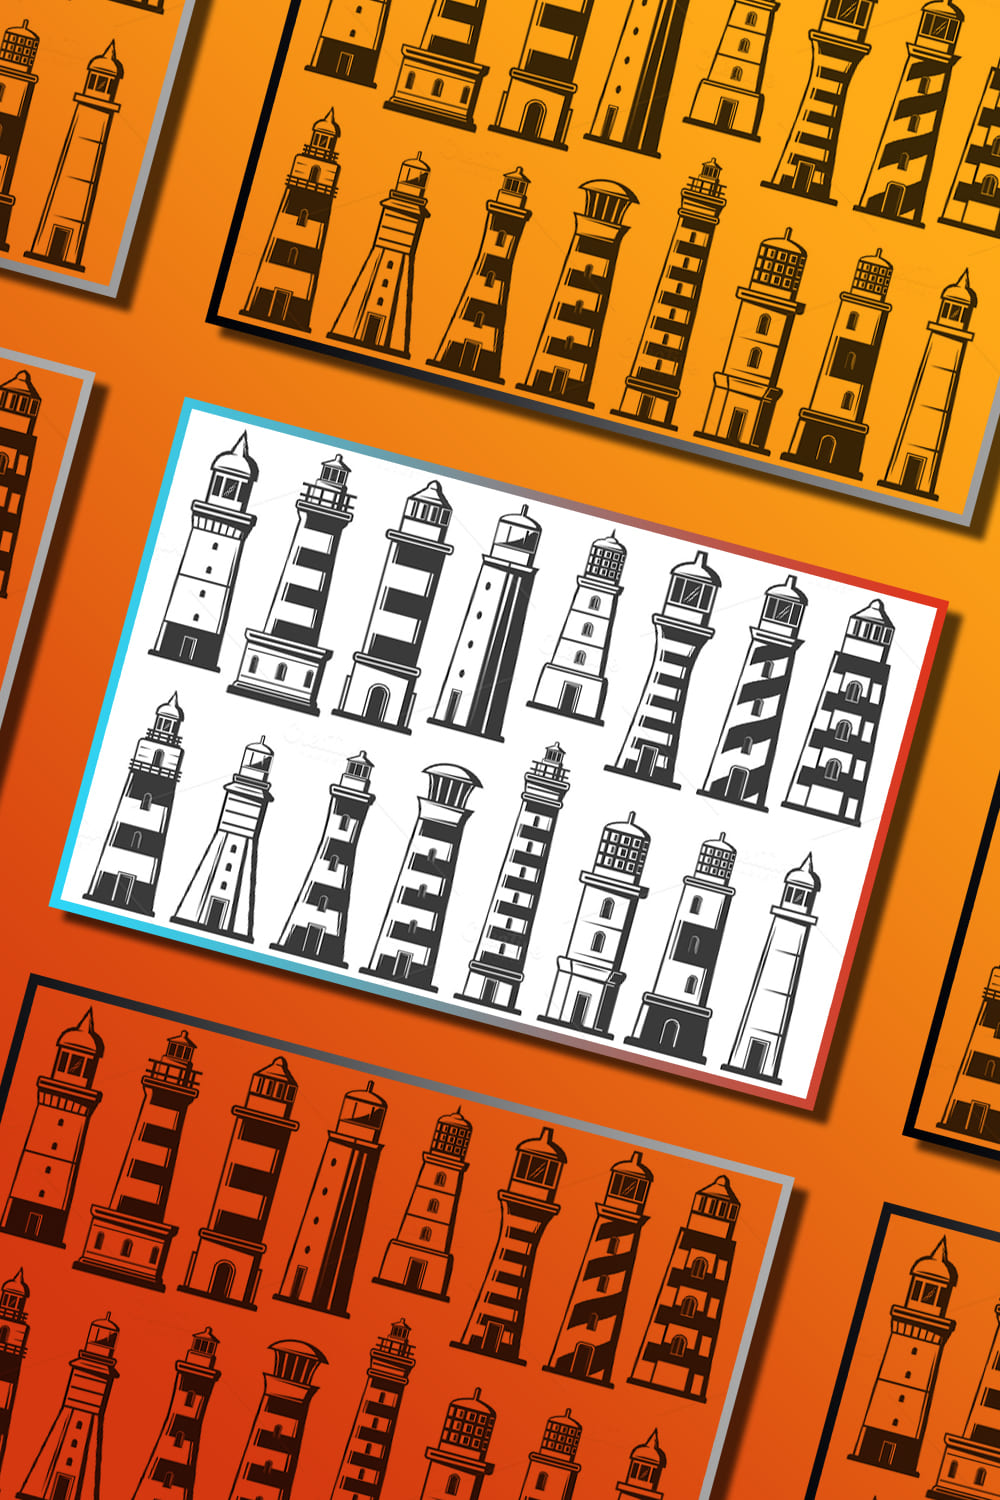 Nautical striped towers navigation for ships and vessels on the orange background.